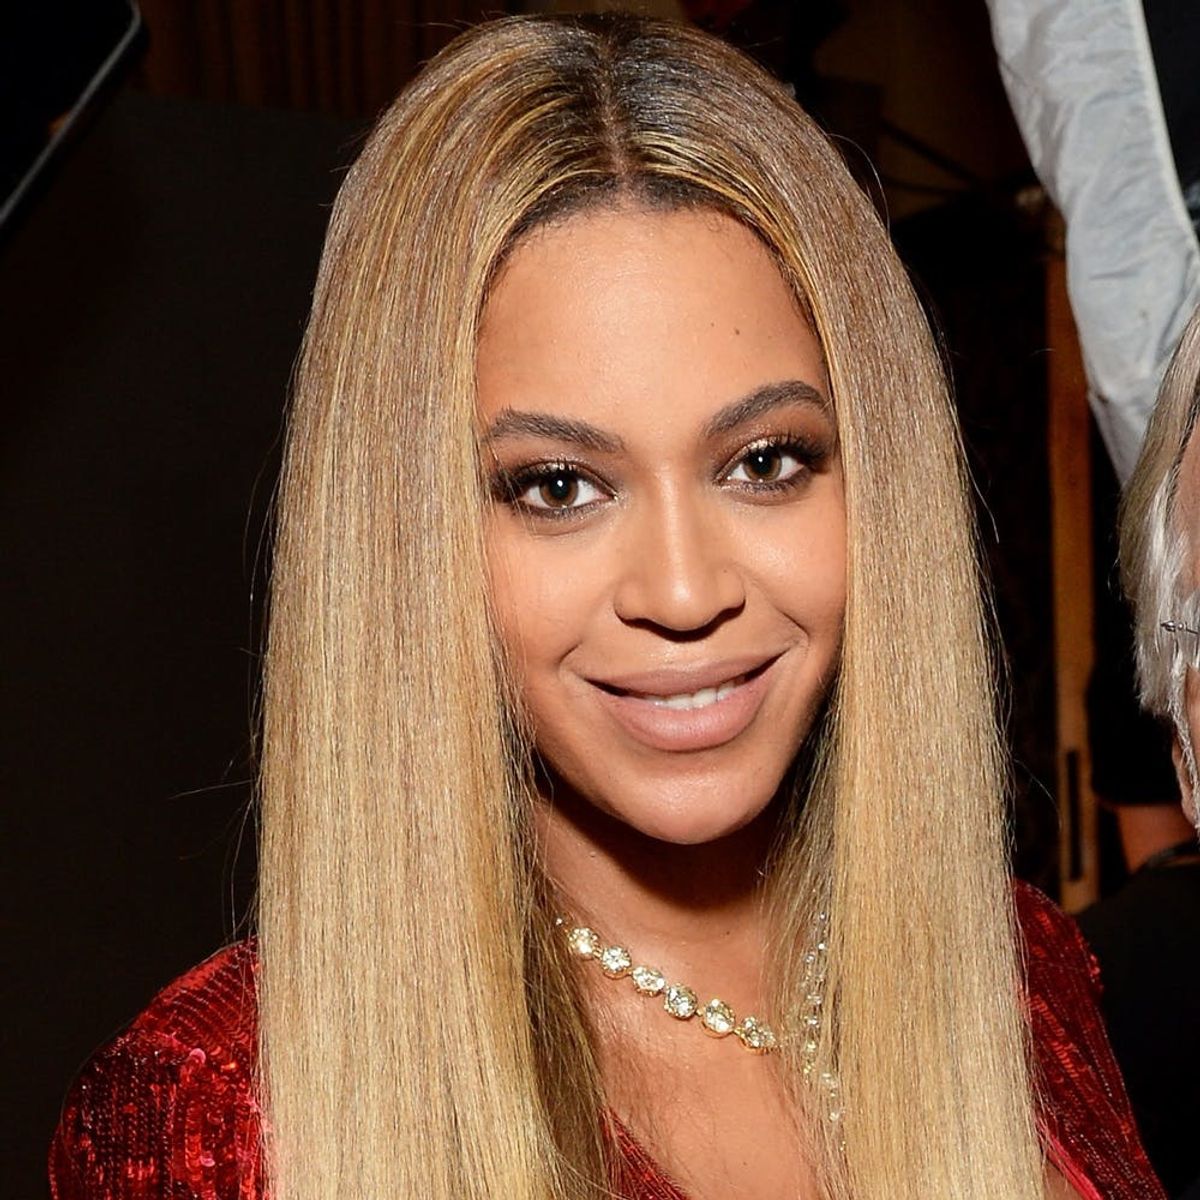 Beyoncé Just Stepped Out in Her Glammest Maternity Look Yet